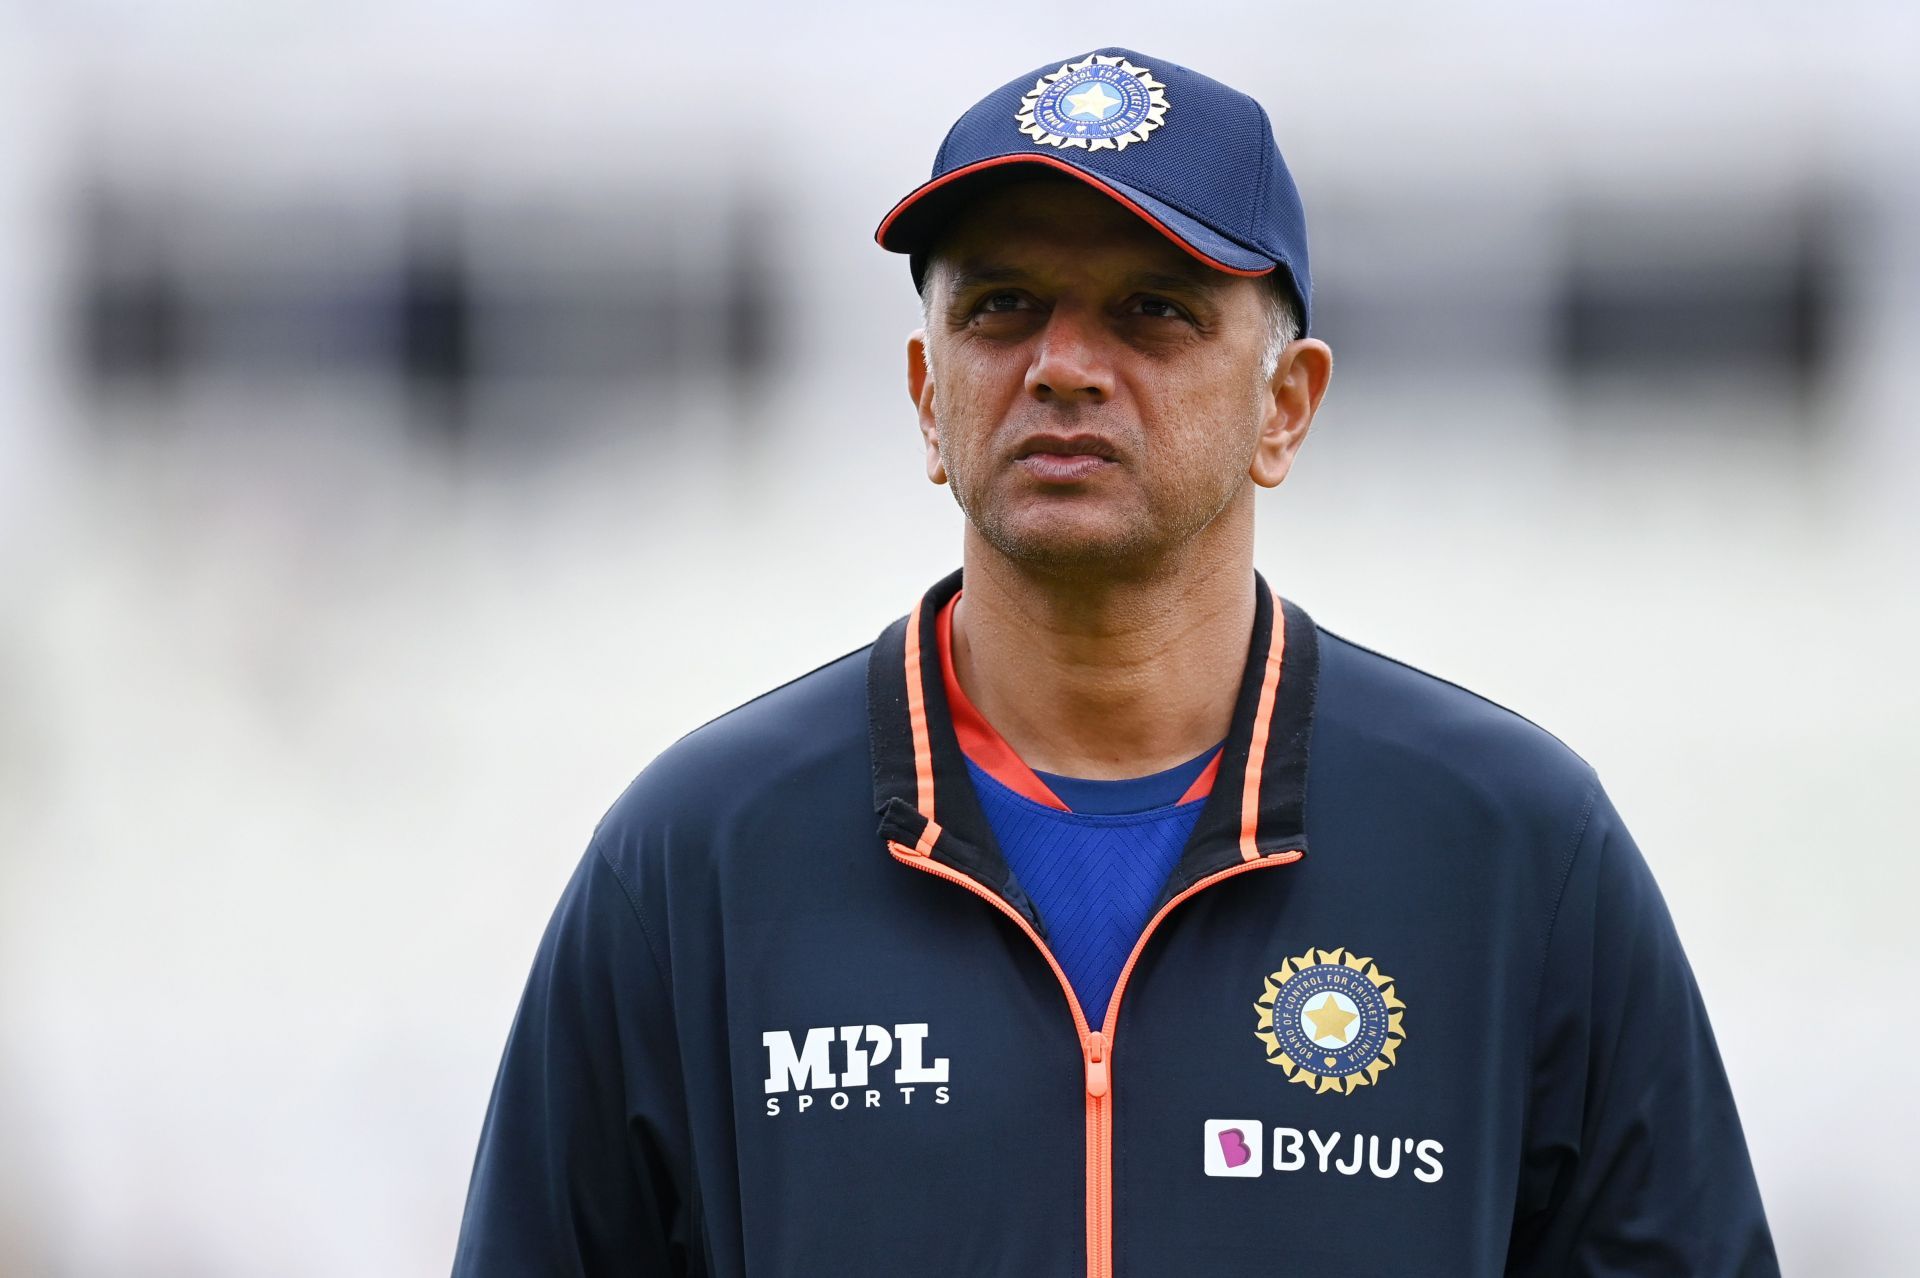 Rahul Dravid played only one T20I match for India (Image: Getty)